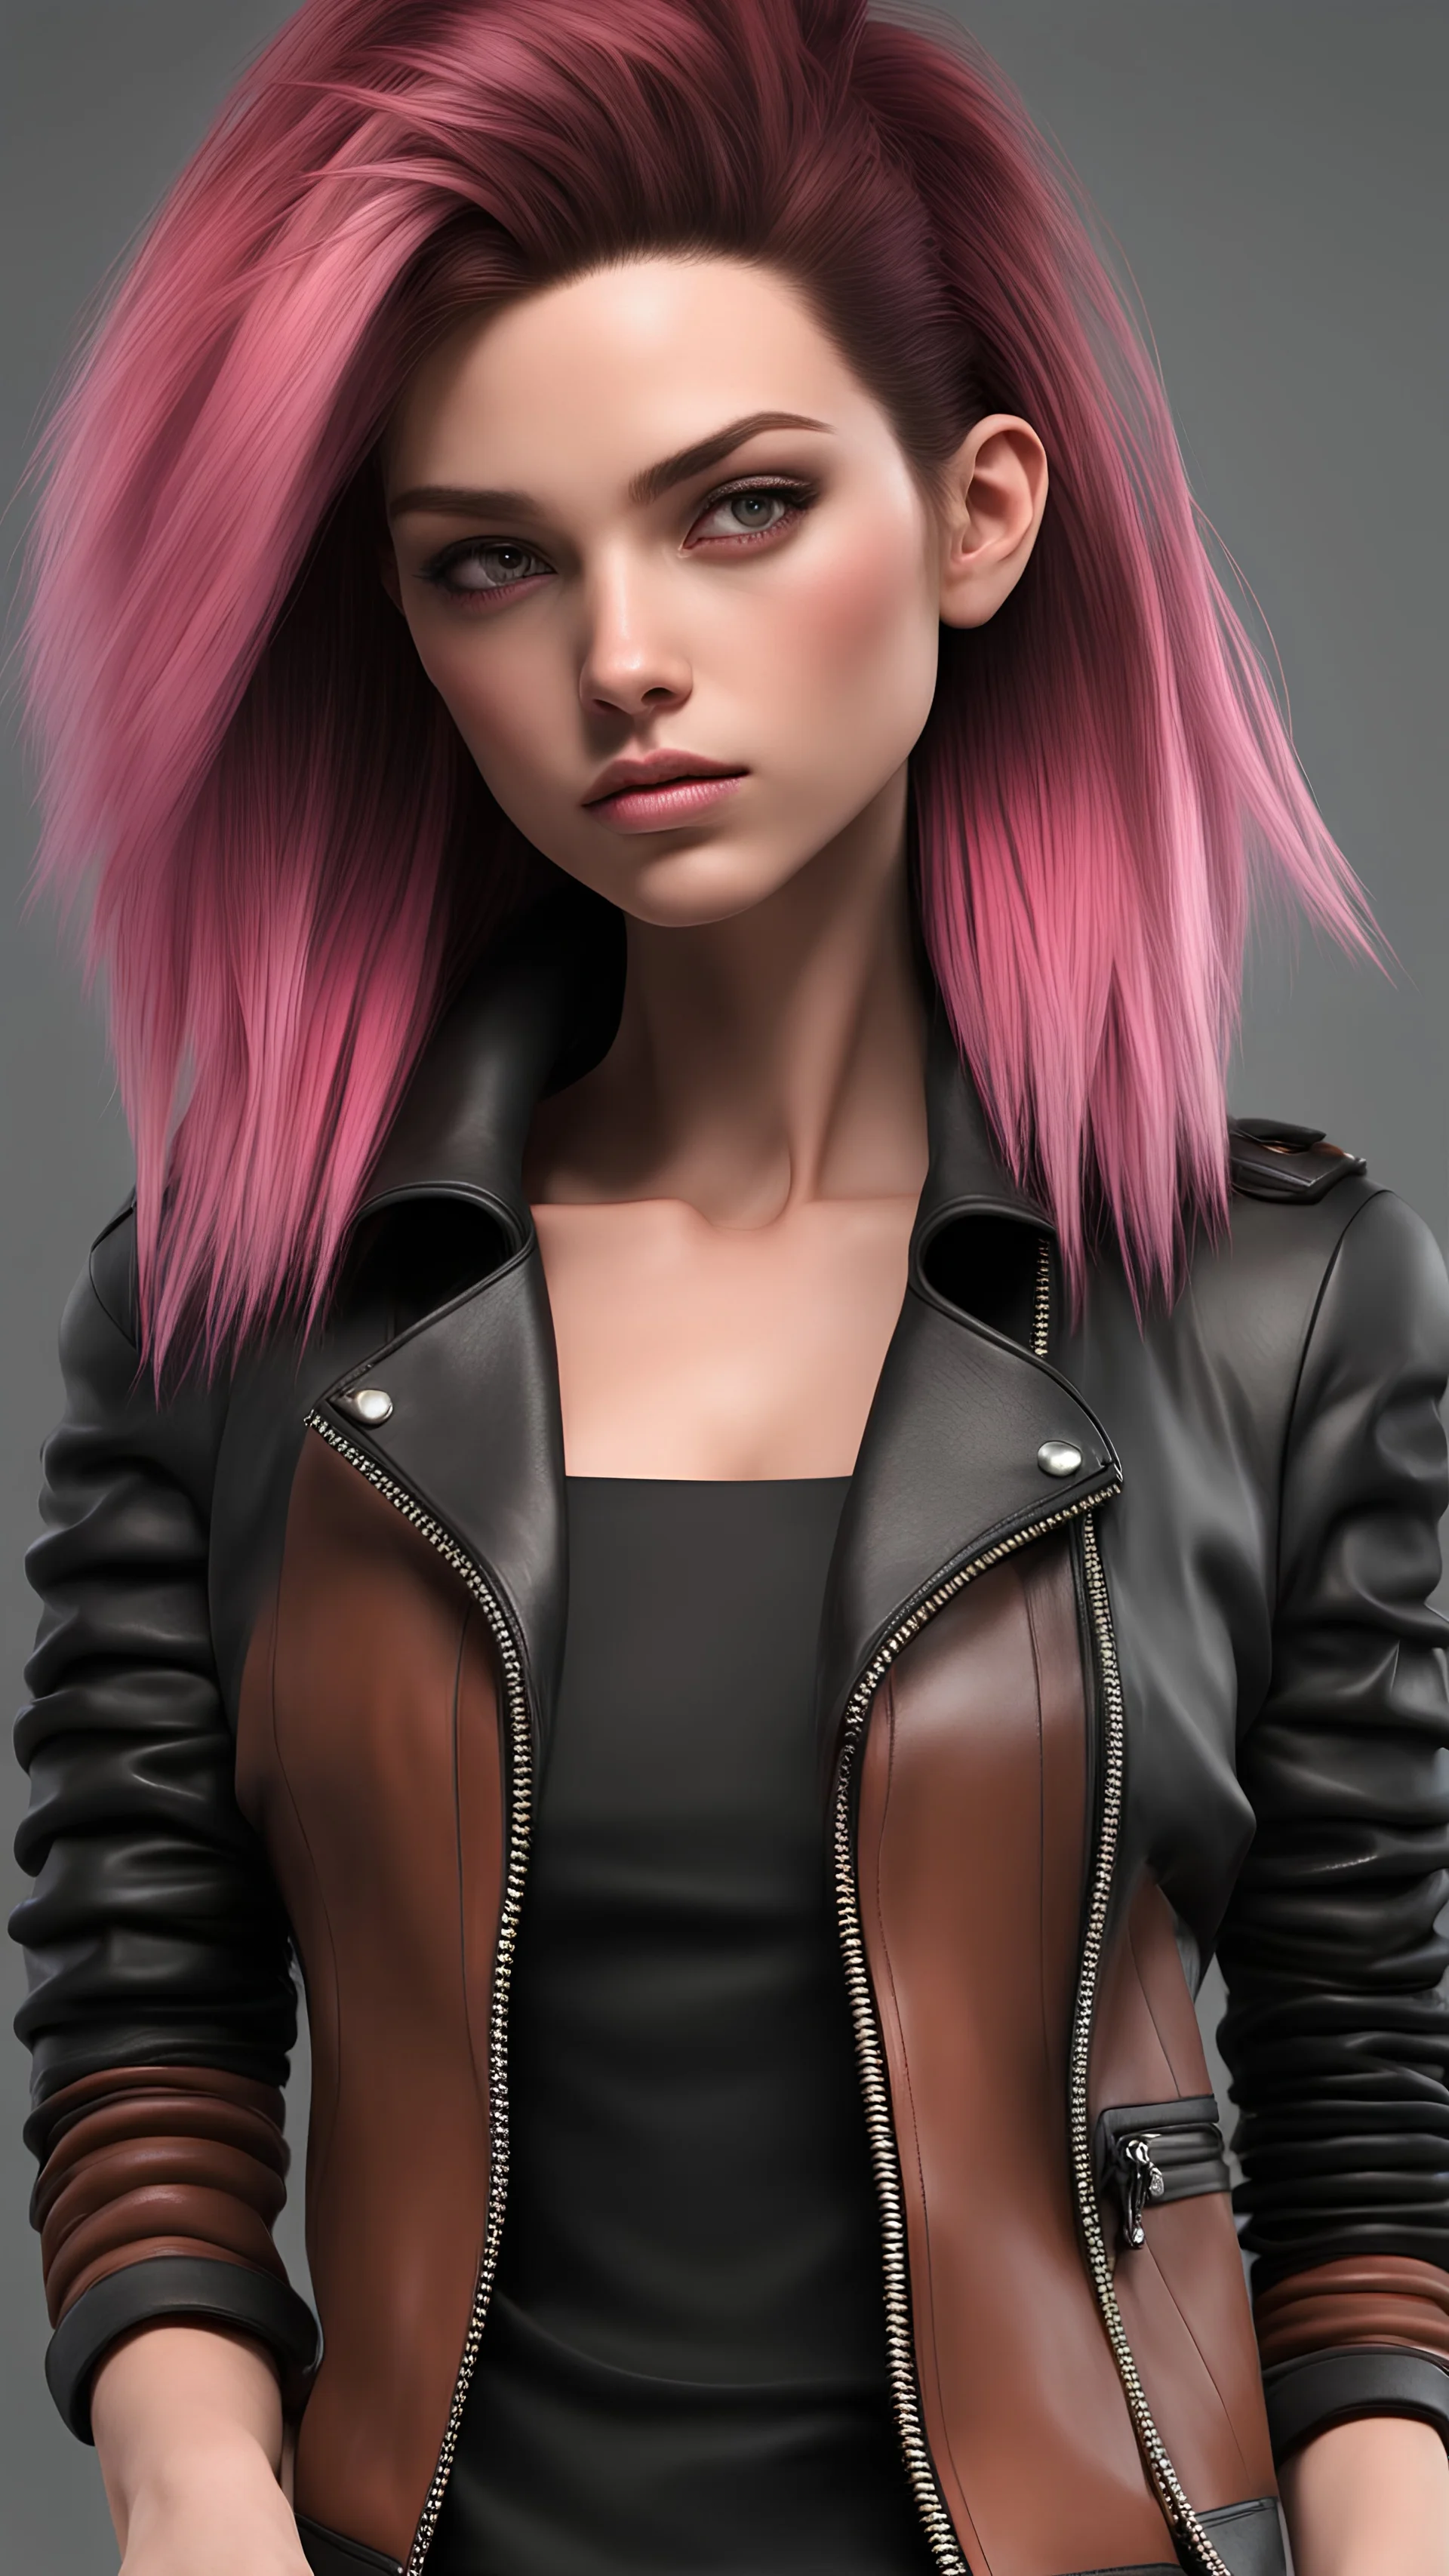 The girl had a distinctive hairstyle – on one side of her head, she rocked a clean-shaven look, while the other side boasted long, brown-to-pink ombre hair adorned with darker horizontal stripes. Completing her edgy style, she wore a black leather jacket with bold spikes on the shoulders., 3d render